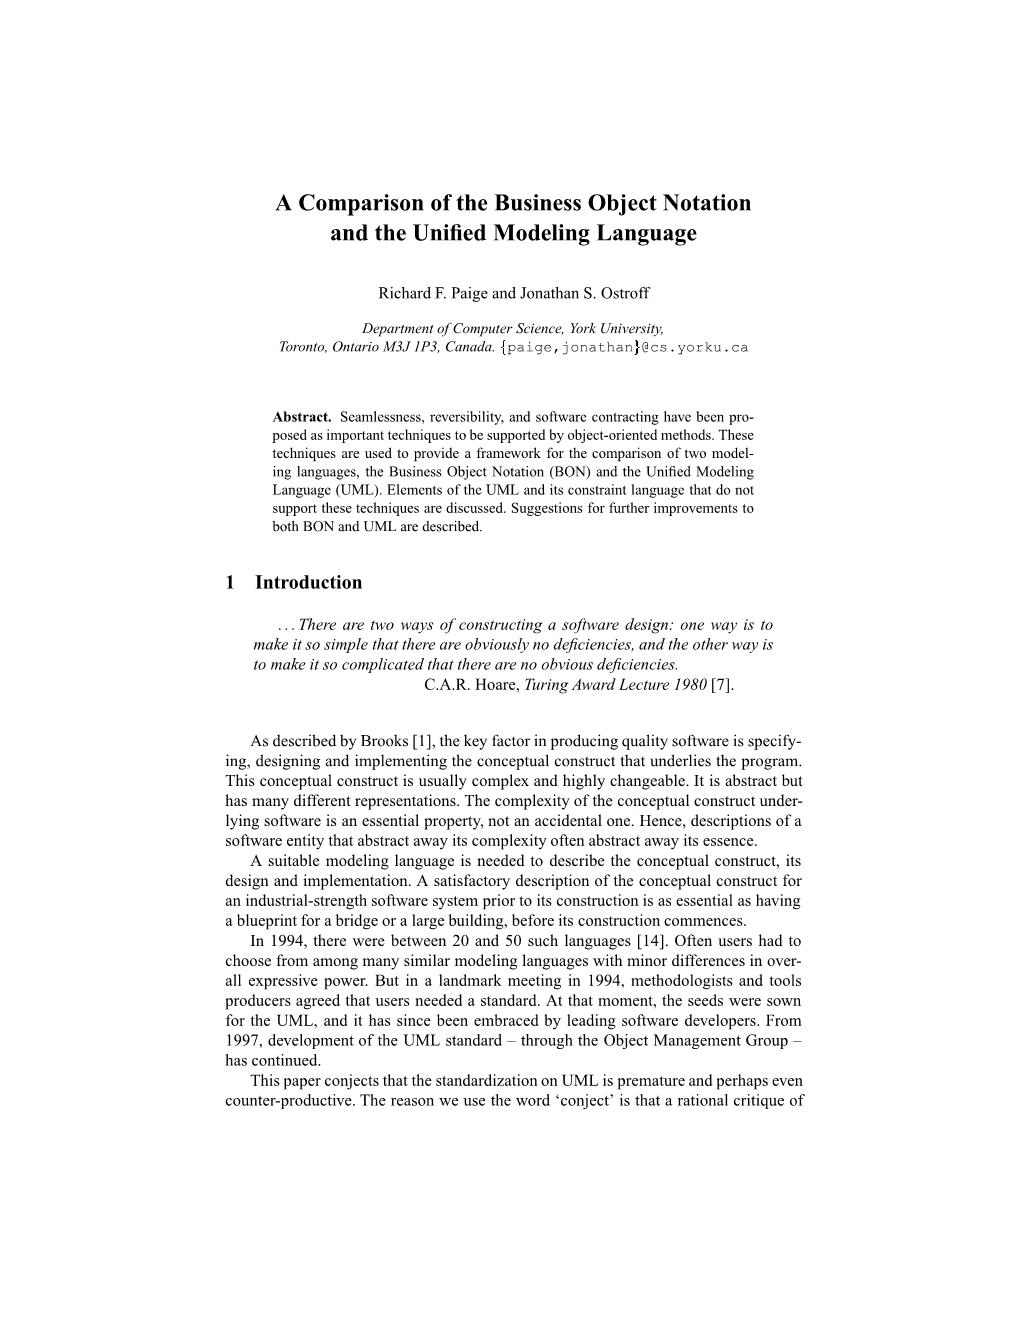 A Comparison of the Business Object Notation and the Unified Modeling Language